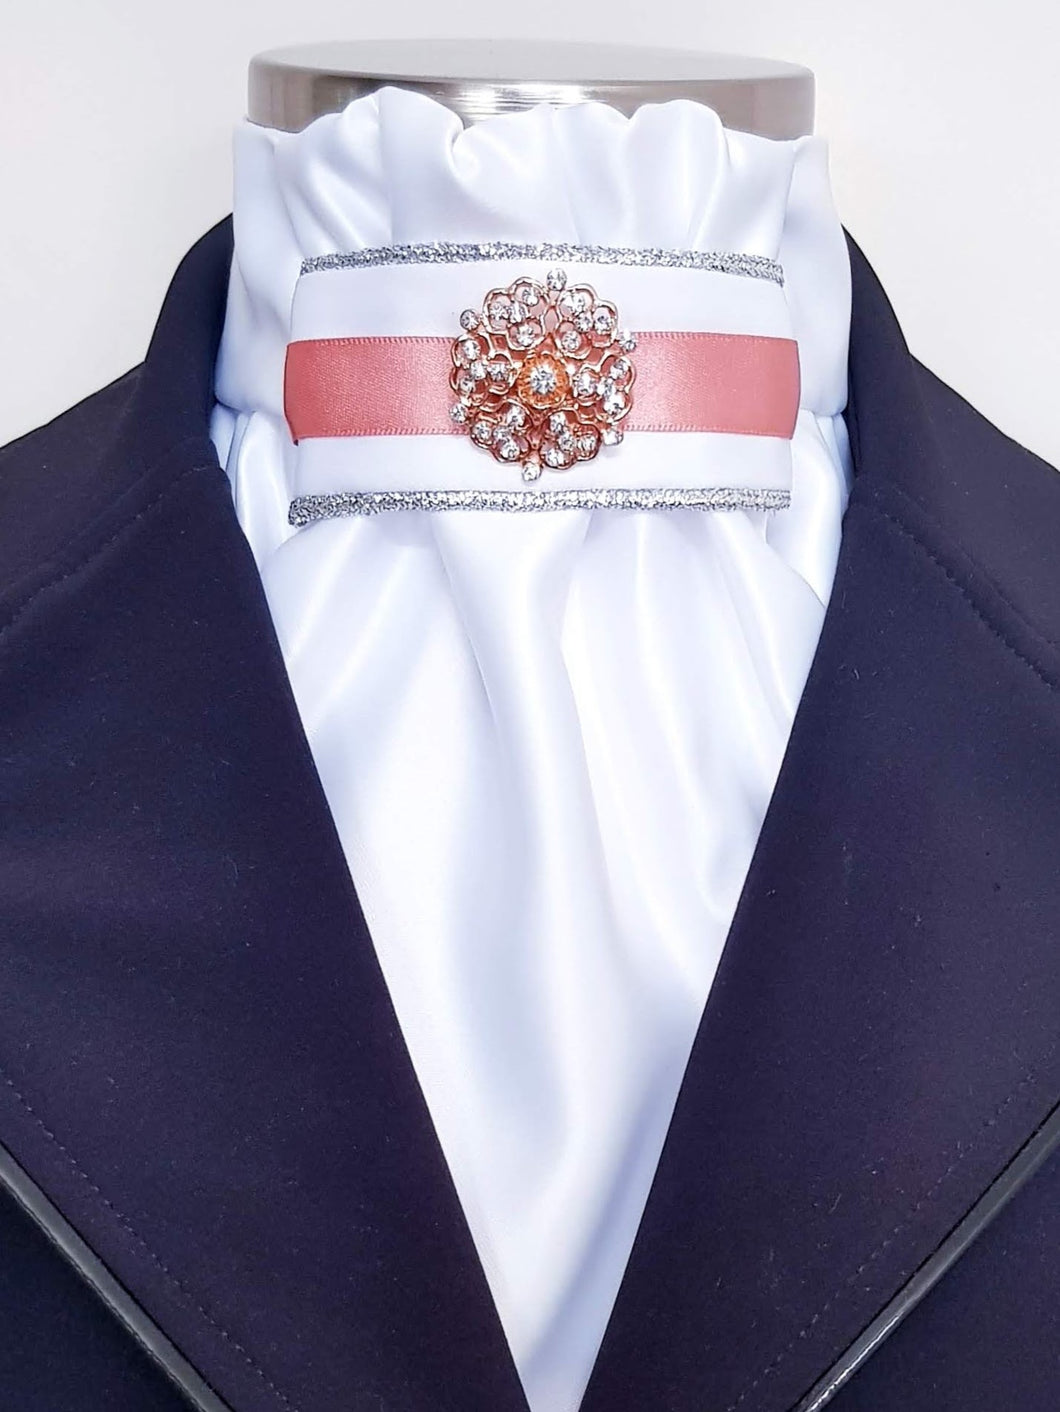 ERA EURO REGAL STOCK TIE - White satin, silver piping, rose gold trim and rose gold brooch